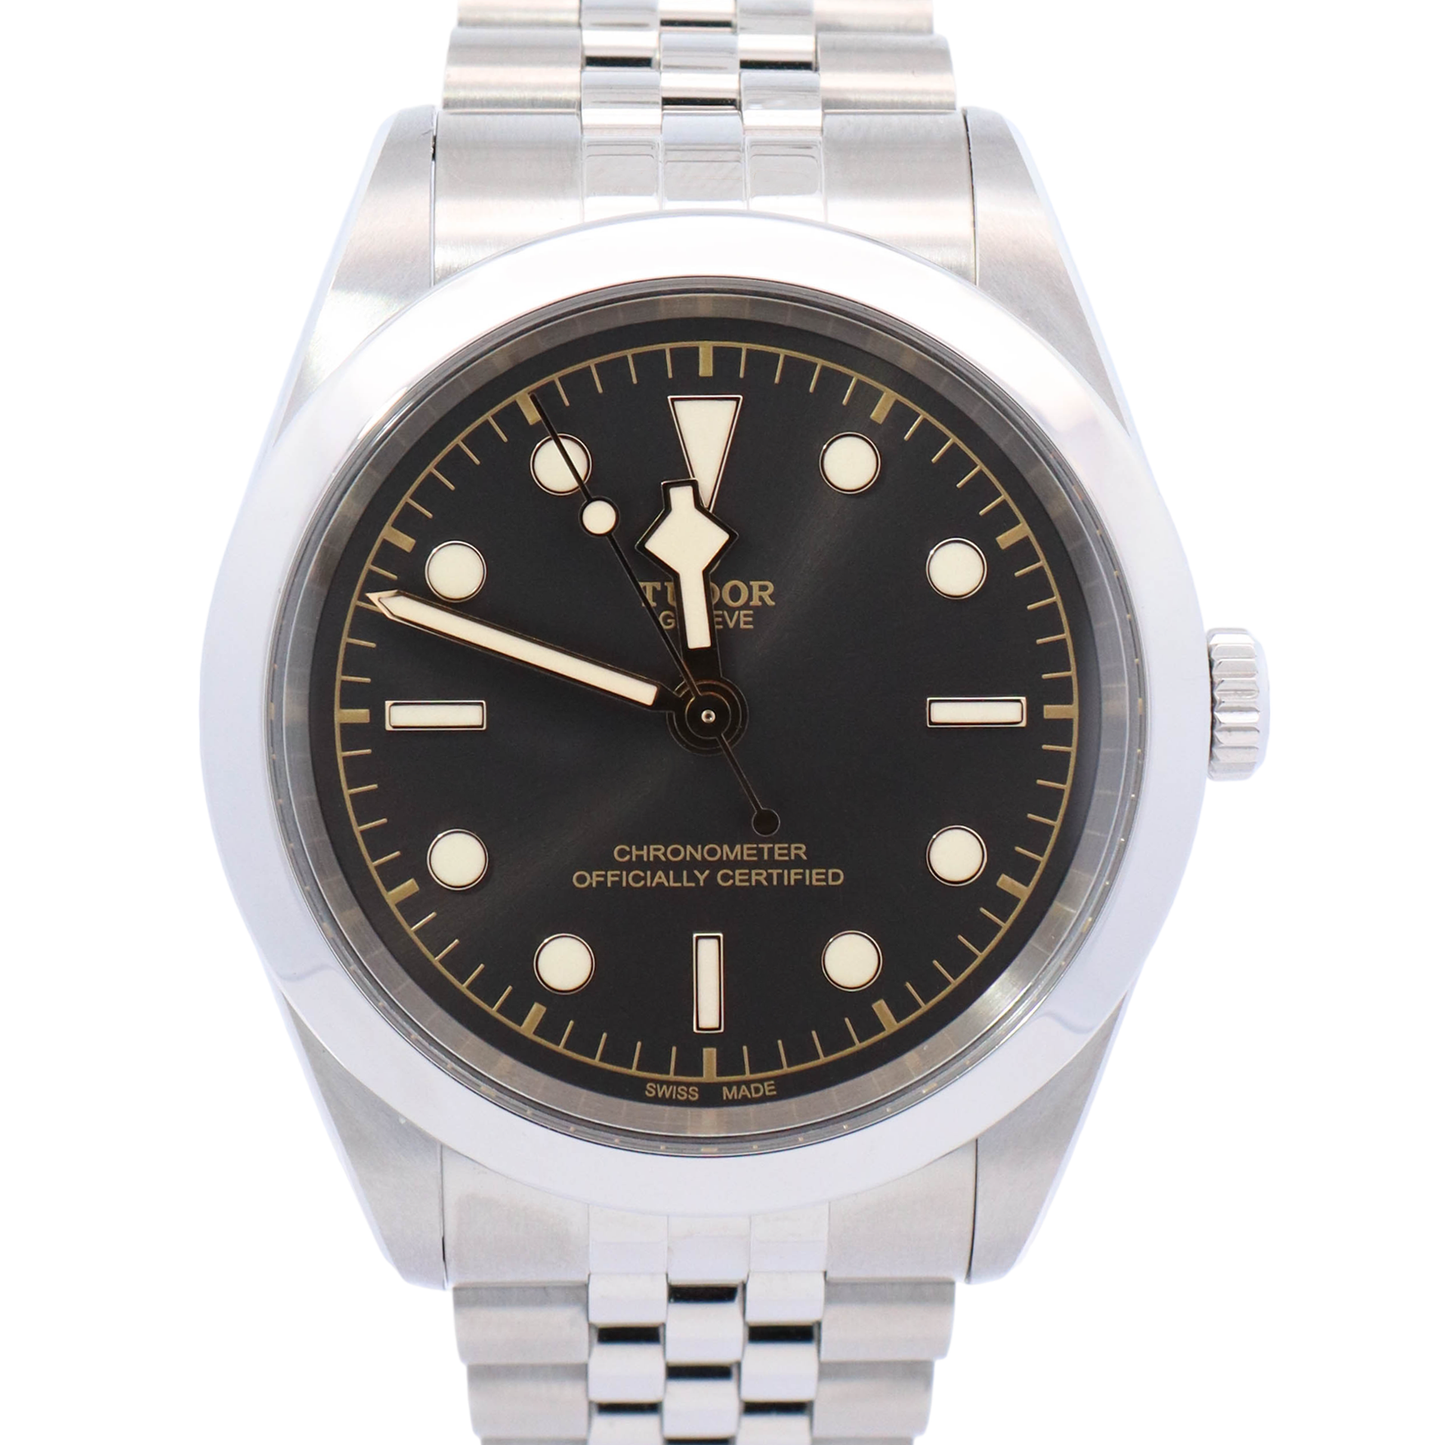 Tudor Black Bay 41mm Stainless Steel Black Dot Dial Watch Reference# 79680-0001